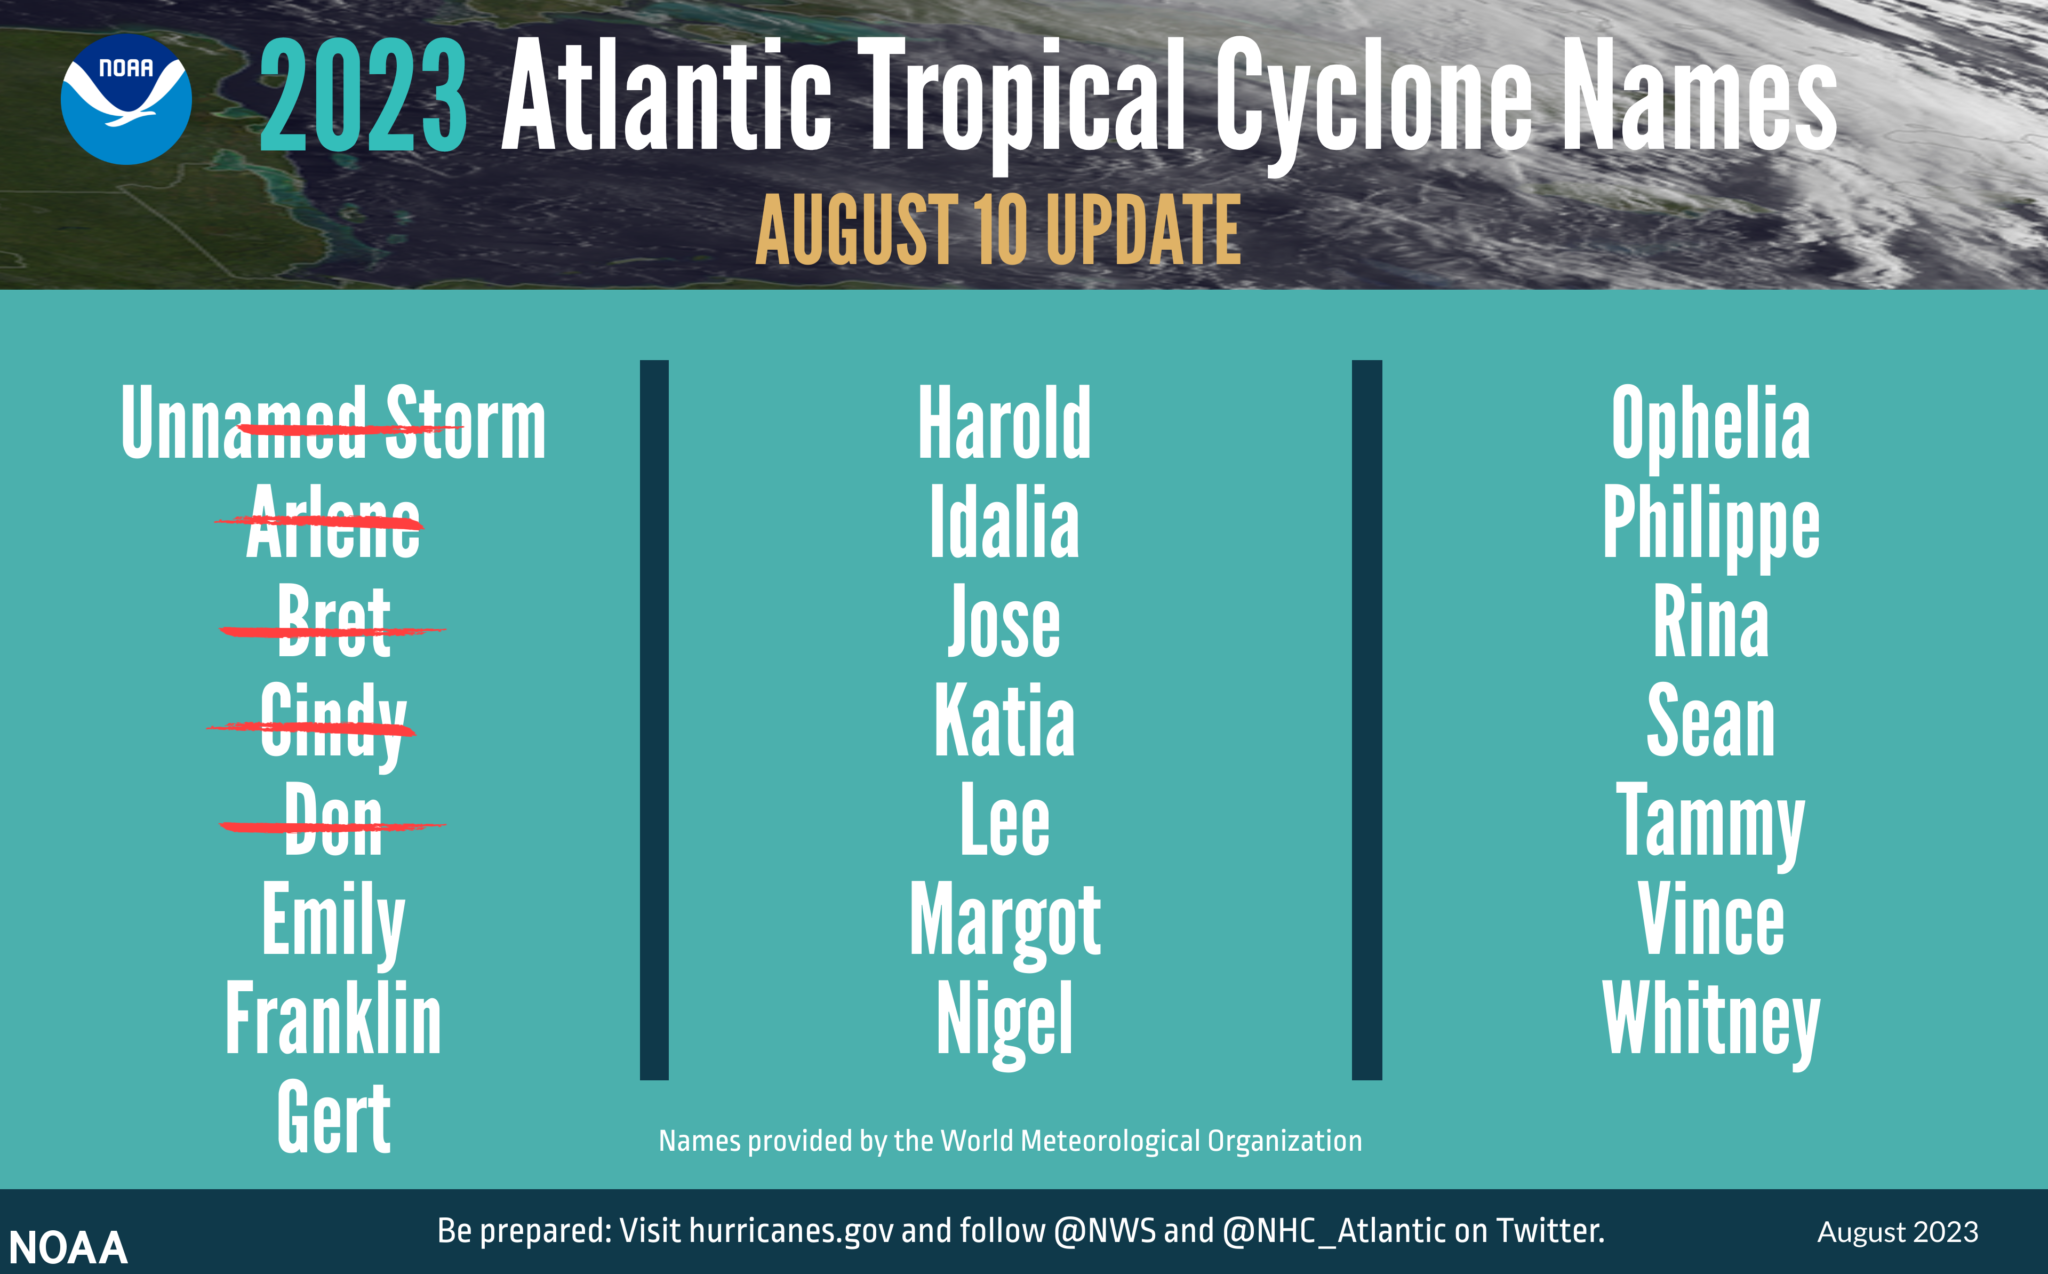 The 2023 Atlantic tropical cyclone names selected by the World Meteorological Organization. (Image courtesy of NOAA)